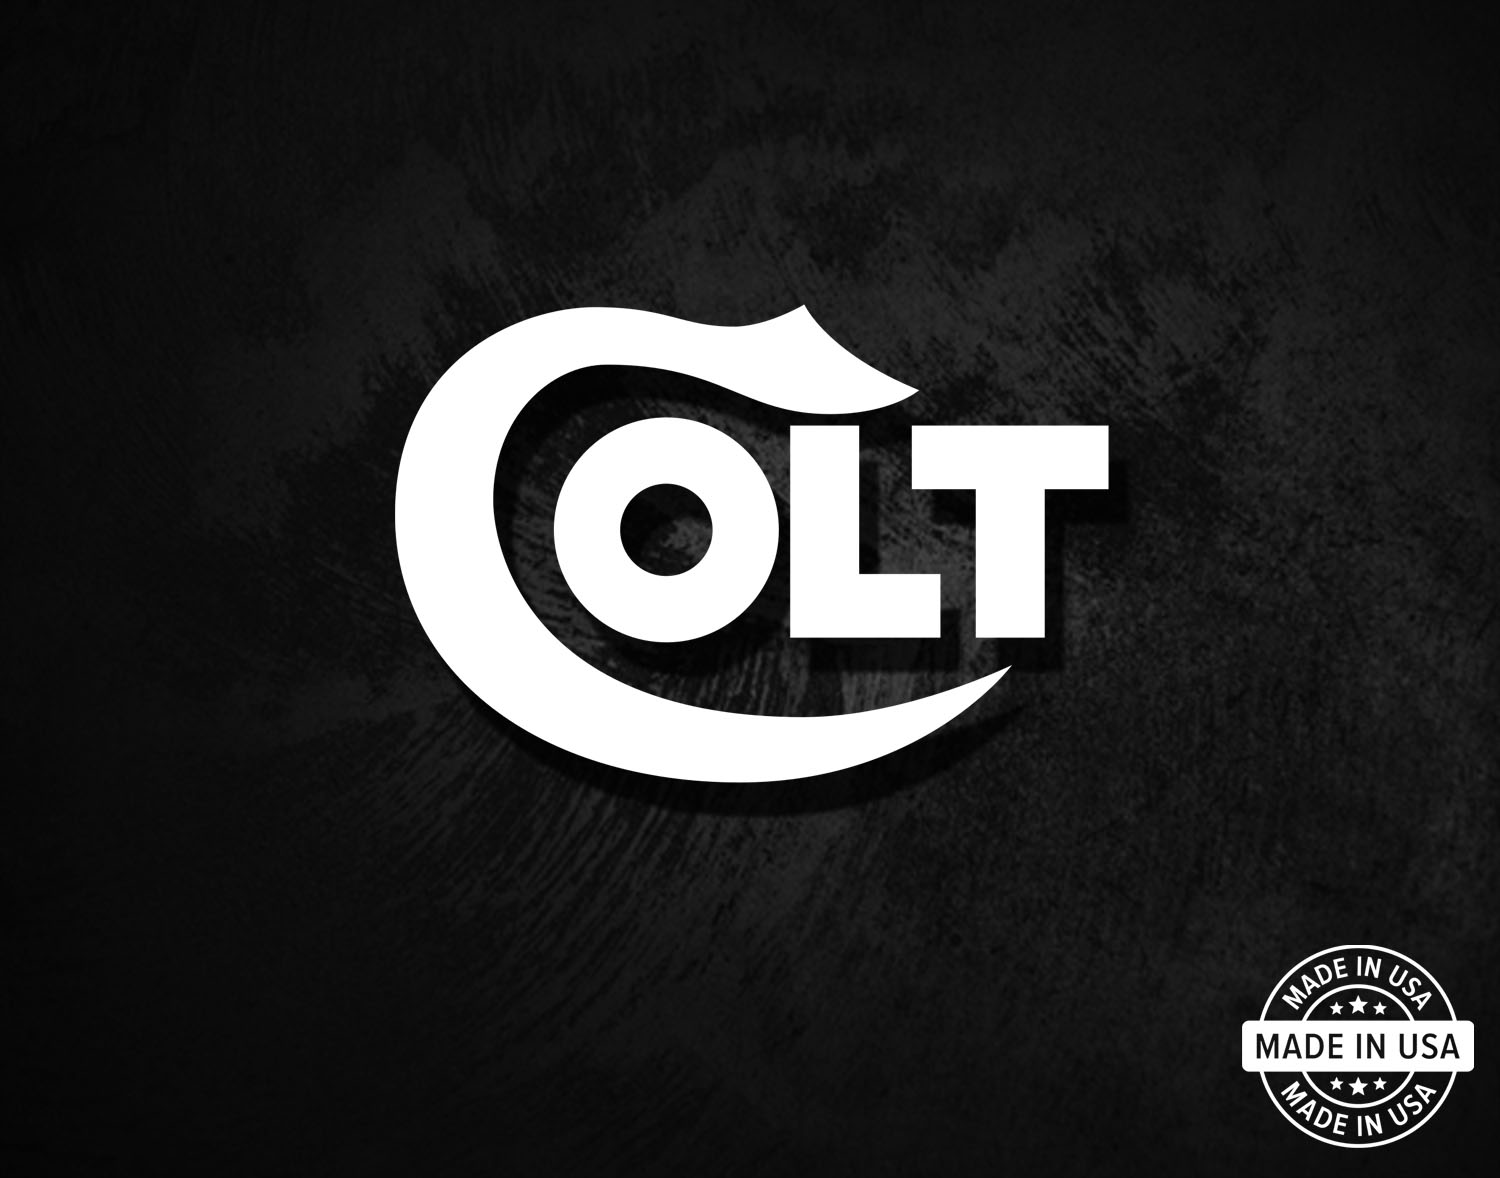 Colt Firearms Decal